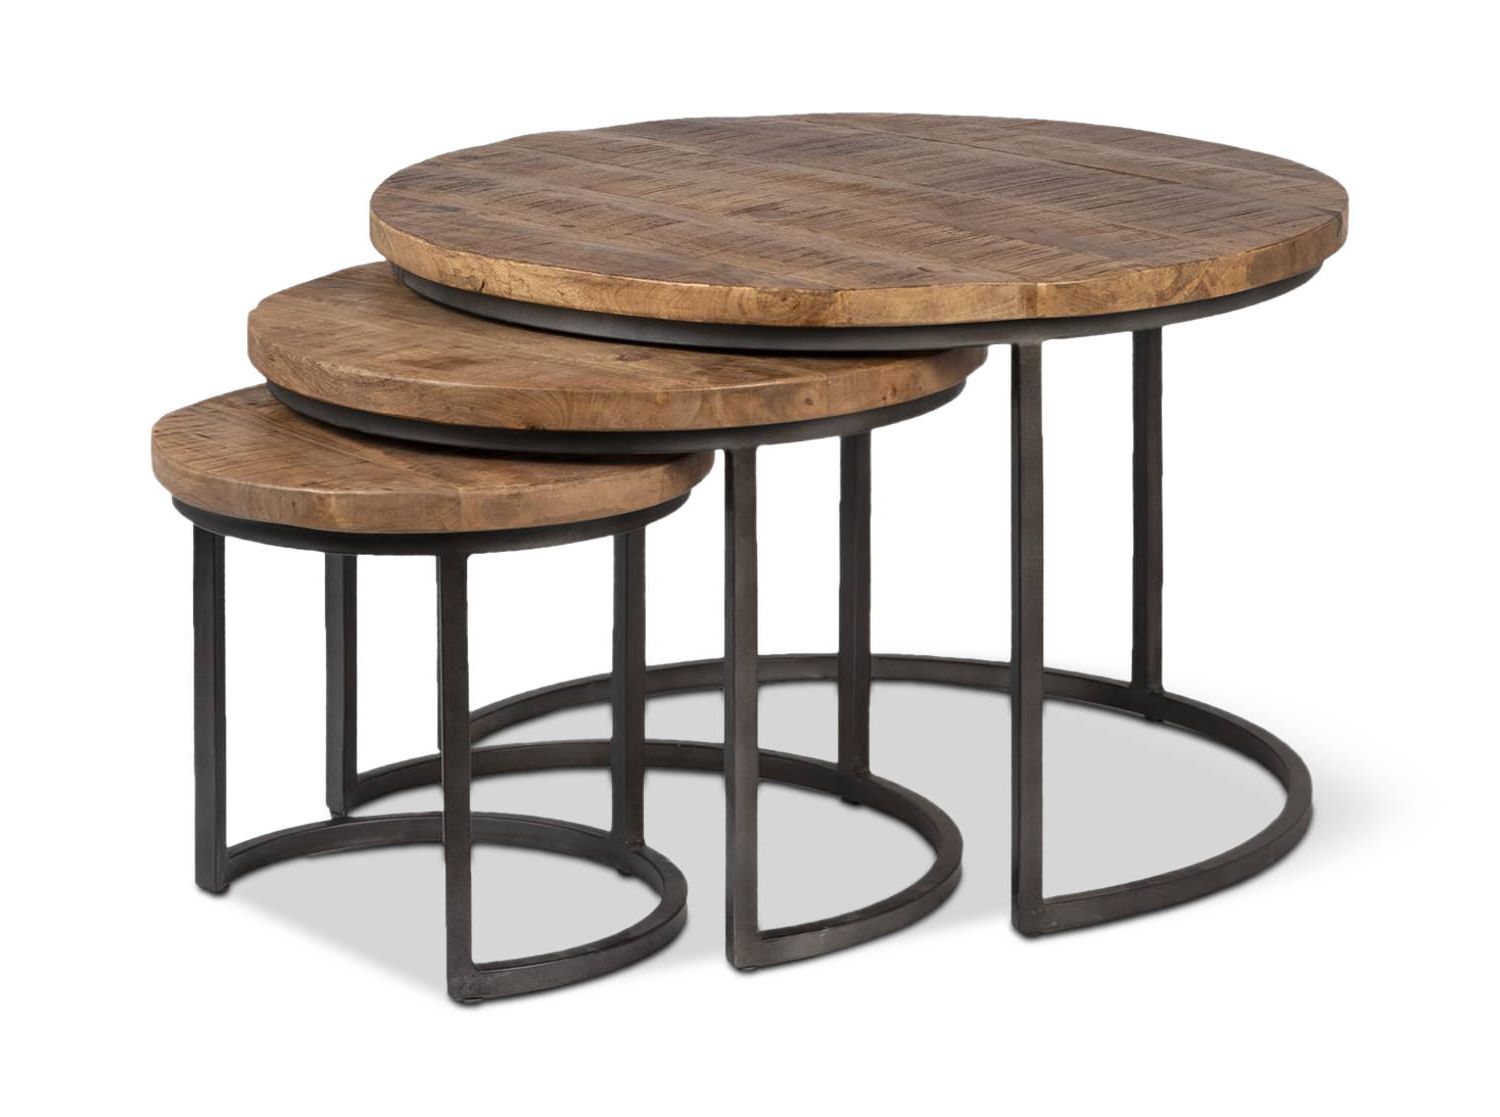 Hom Furniture Regarding Most Current Coffee Tables Of 3 Nesting Tables (View 4 of 10)